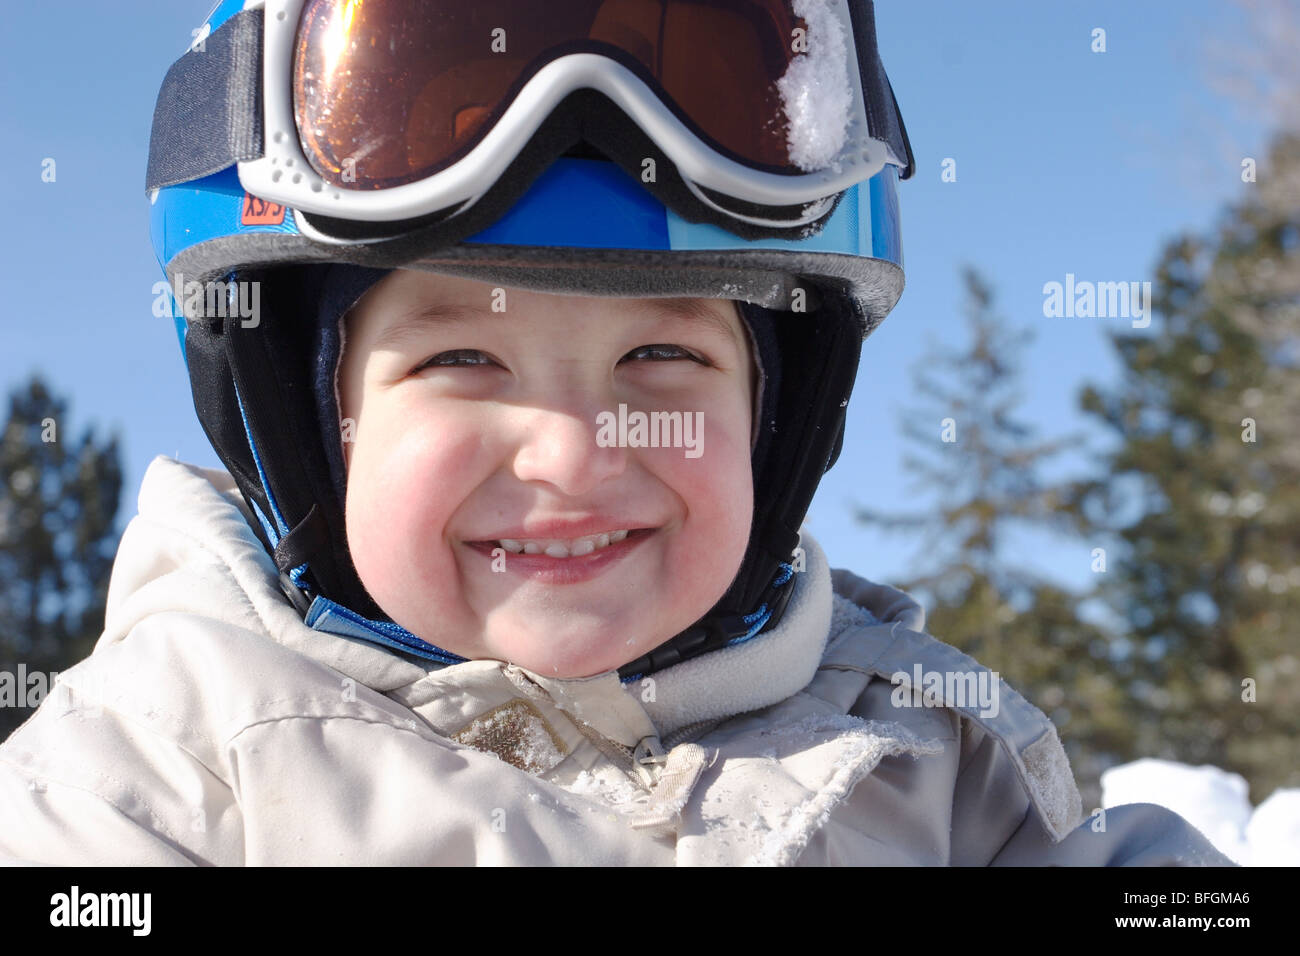 Young boy wearing ski helmet and goggles, King City, Ontario Stock Photo